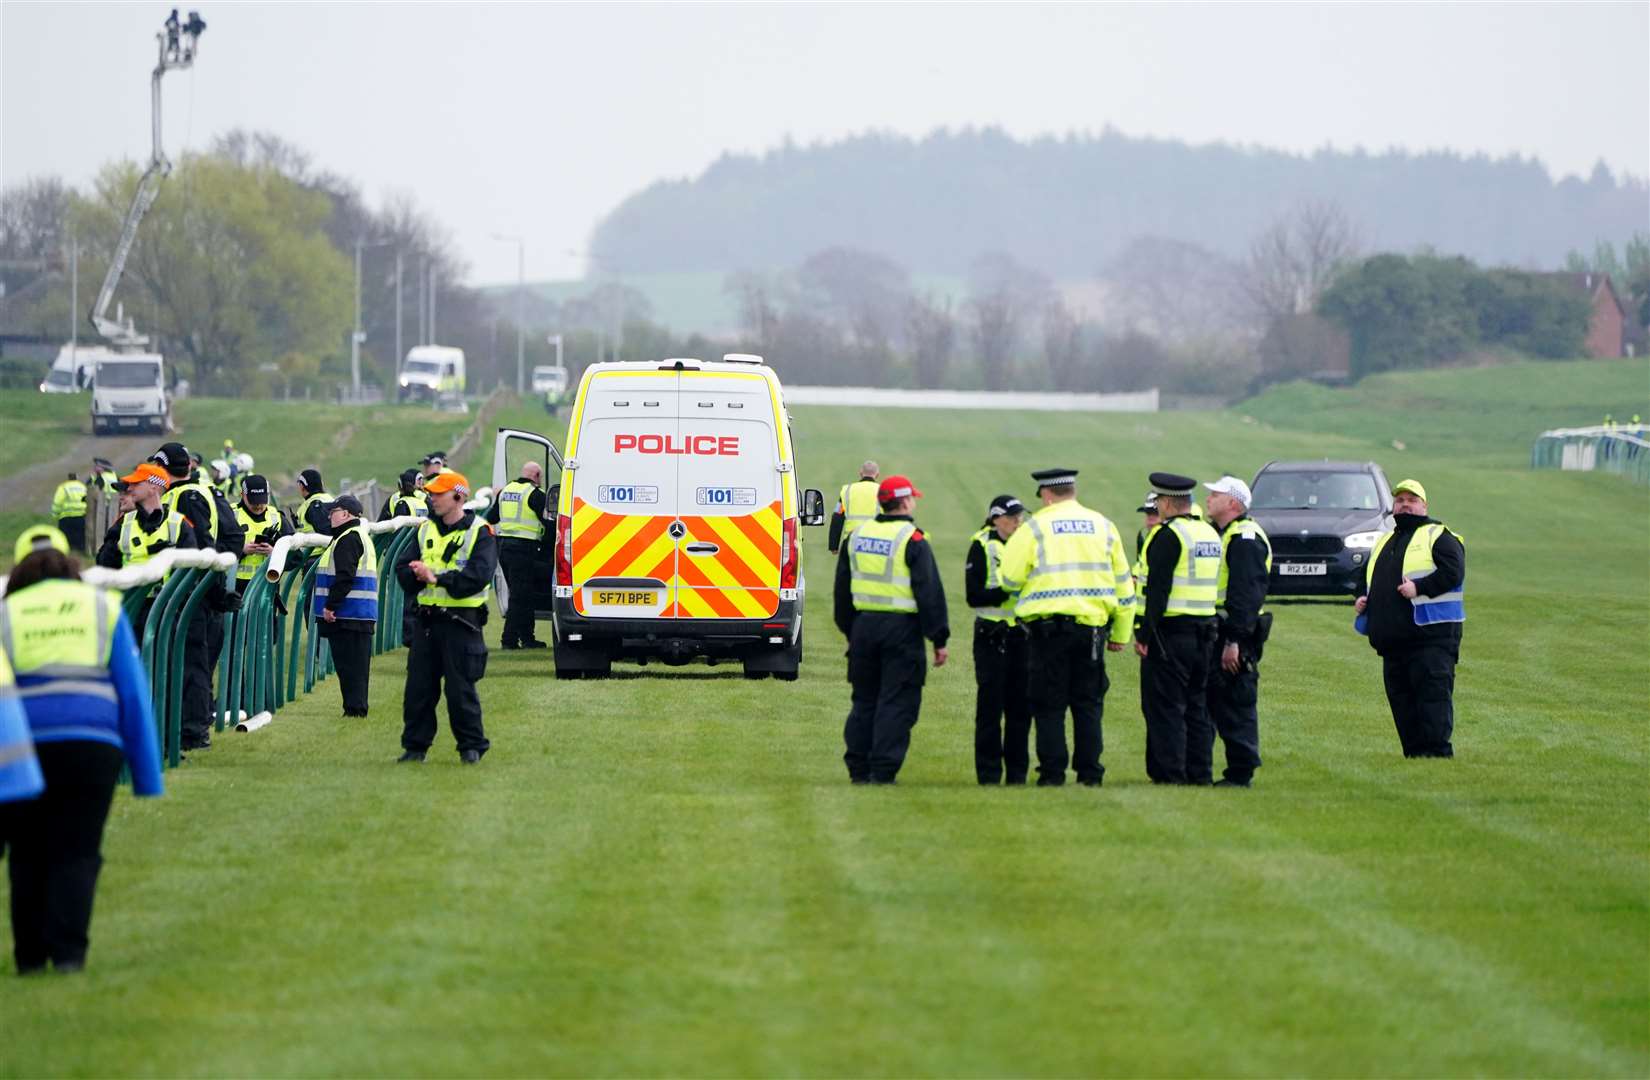 Police officers on the course after Animal Rising activists had to be removed from the track during the Coral Scottish Grand National festival at Ayr Racecourse in April (PA)